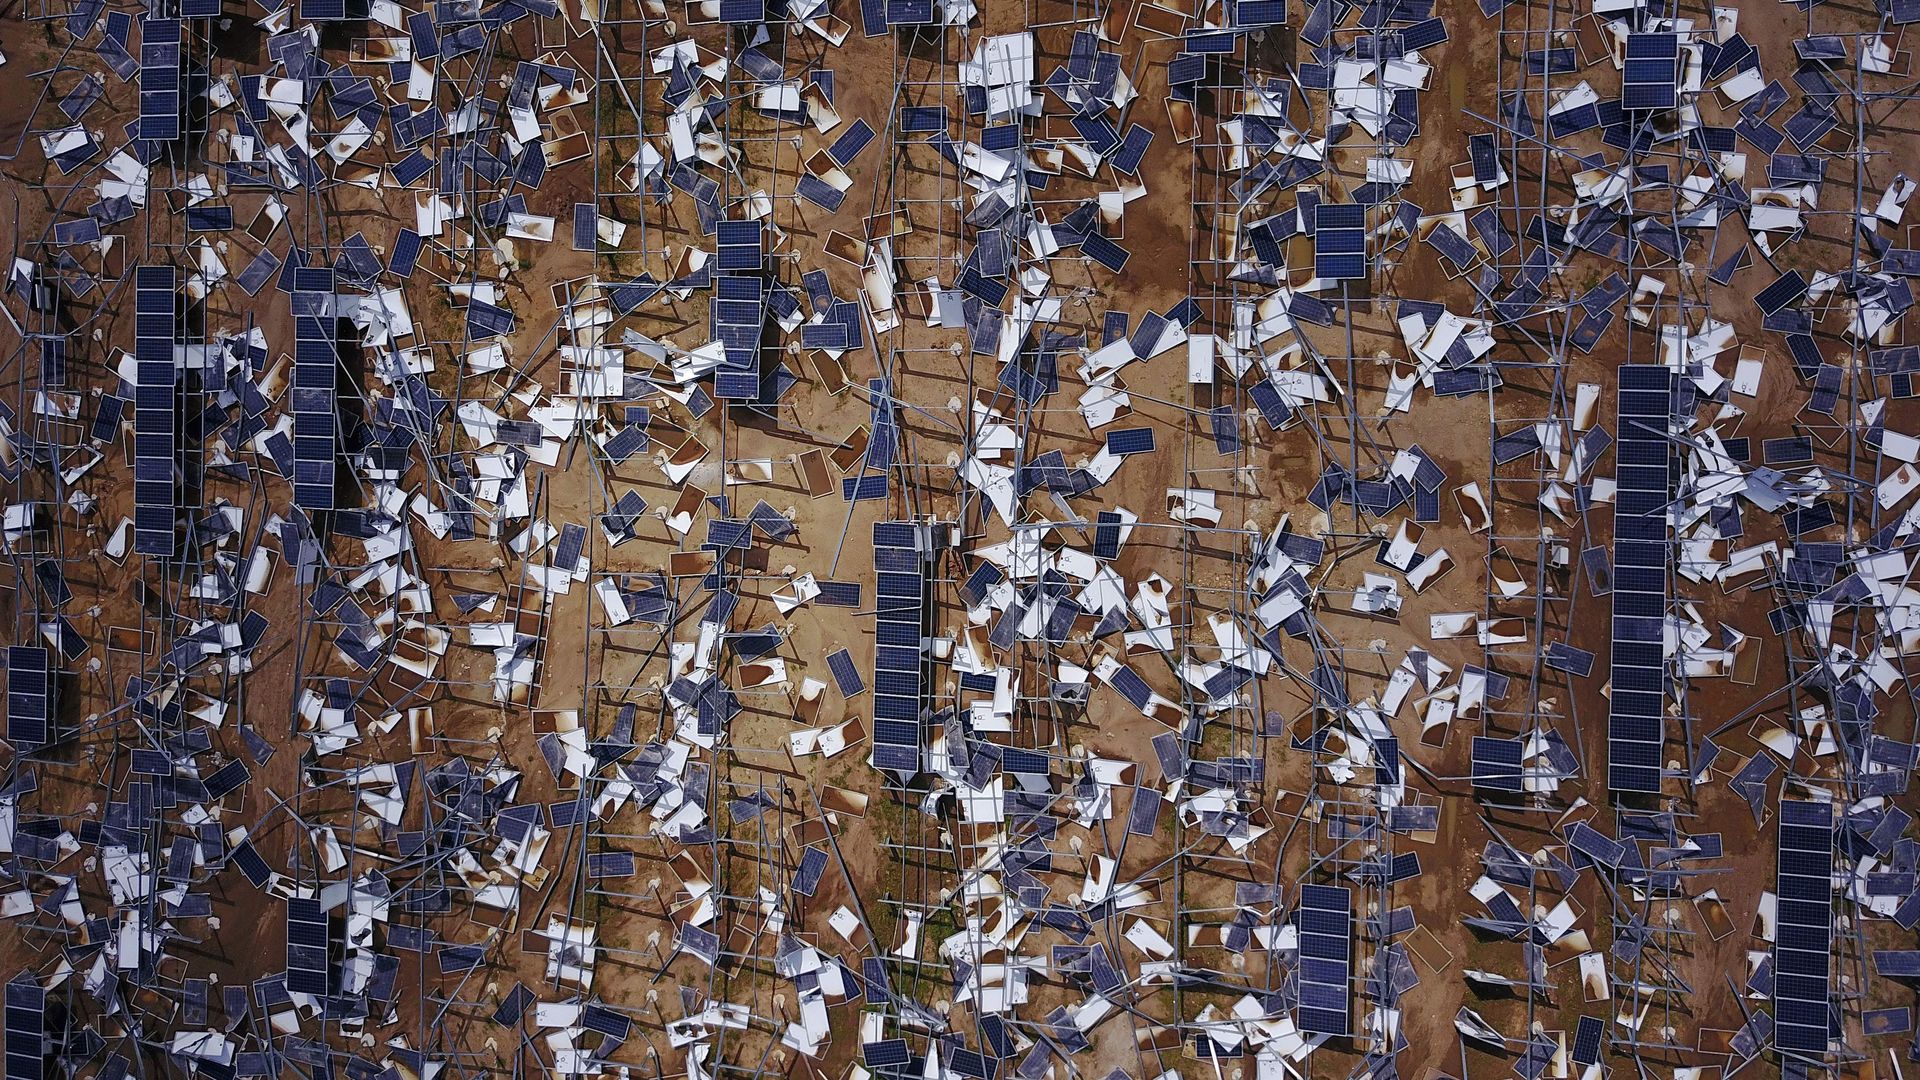 This is a birds eye view of destroyed solar panels in a dirt field. 